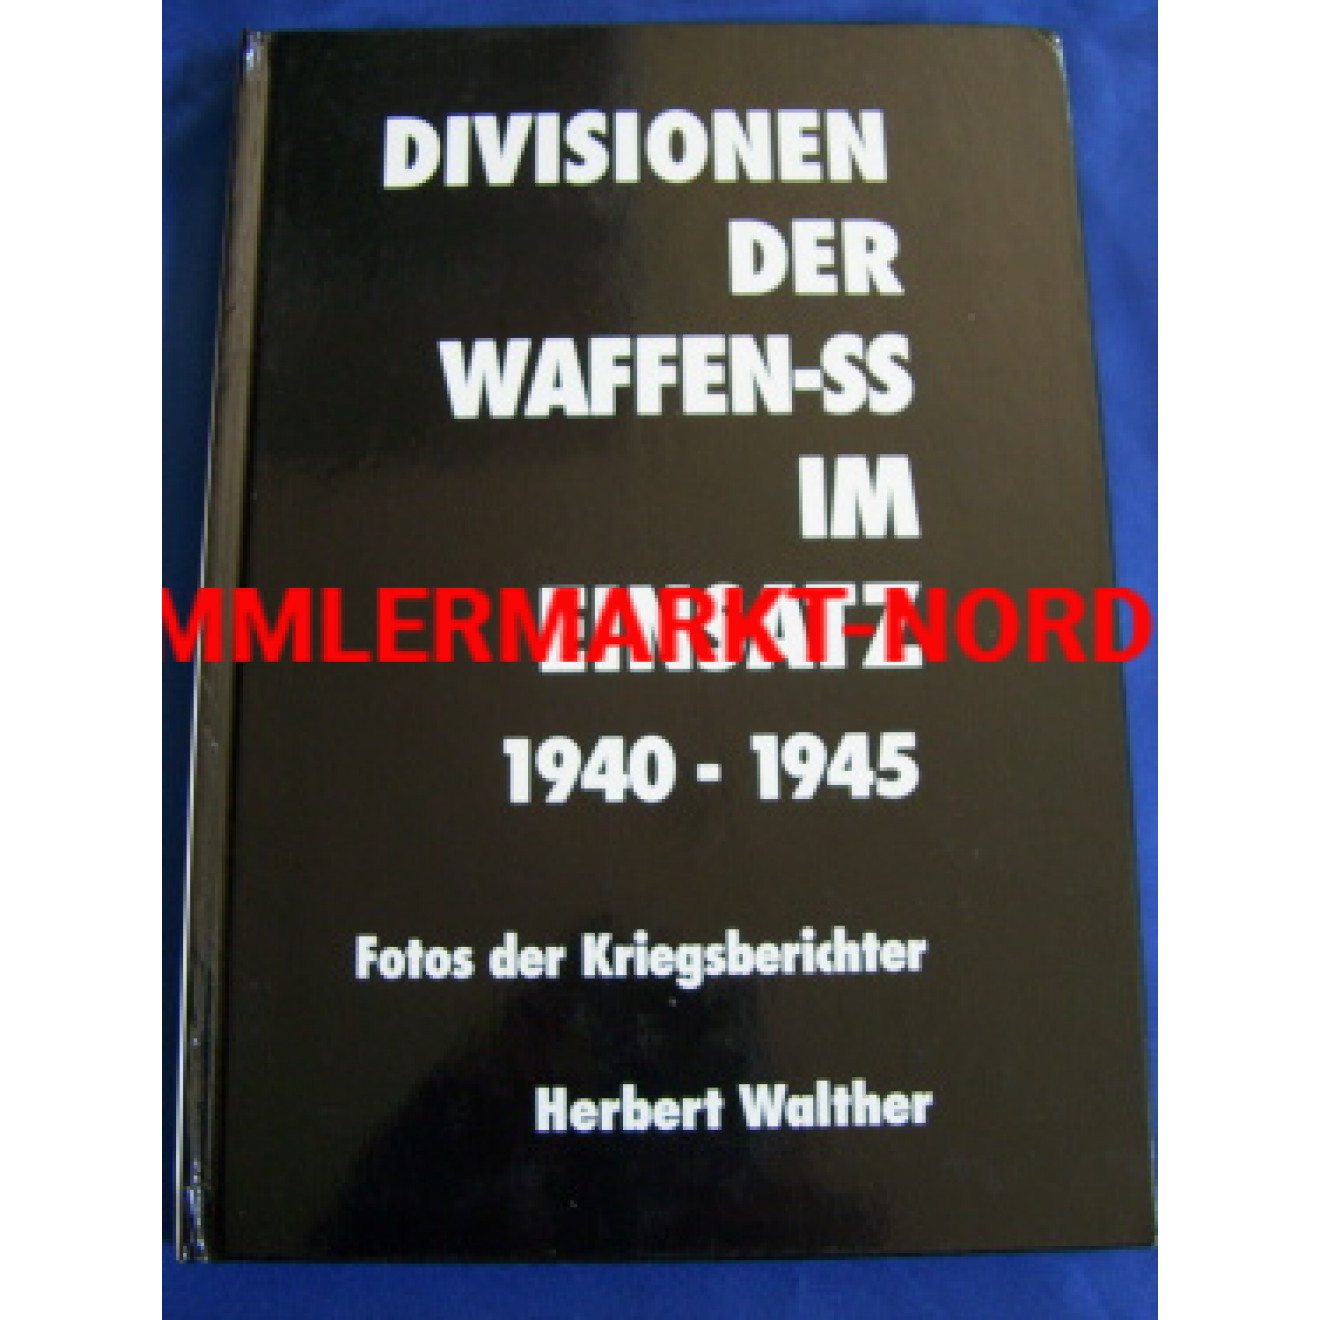 Divisions of the Waffen - SS in the employment 1940-1945 - photo